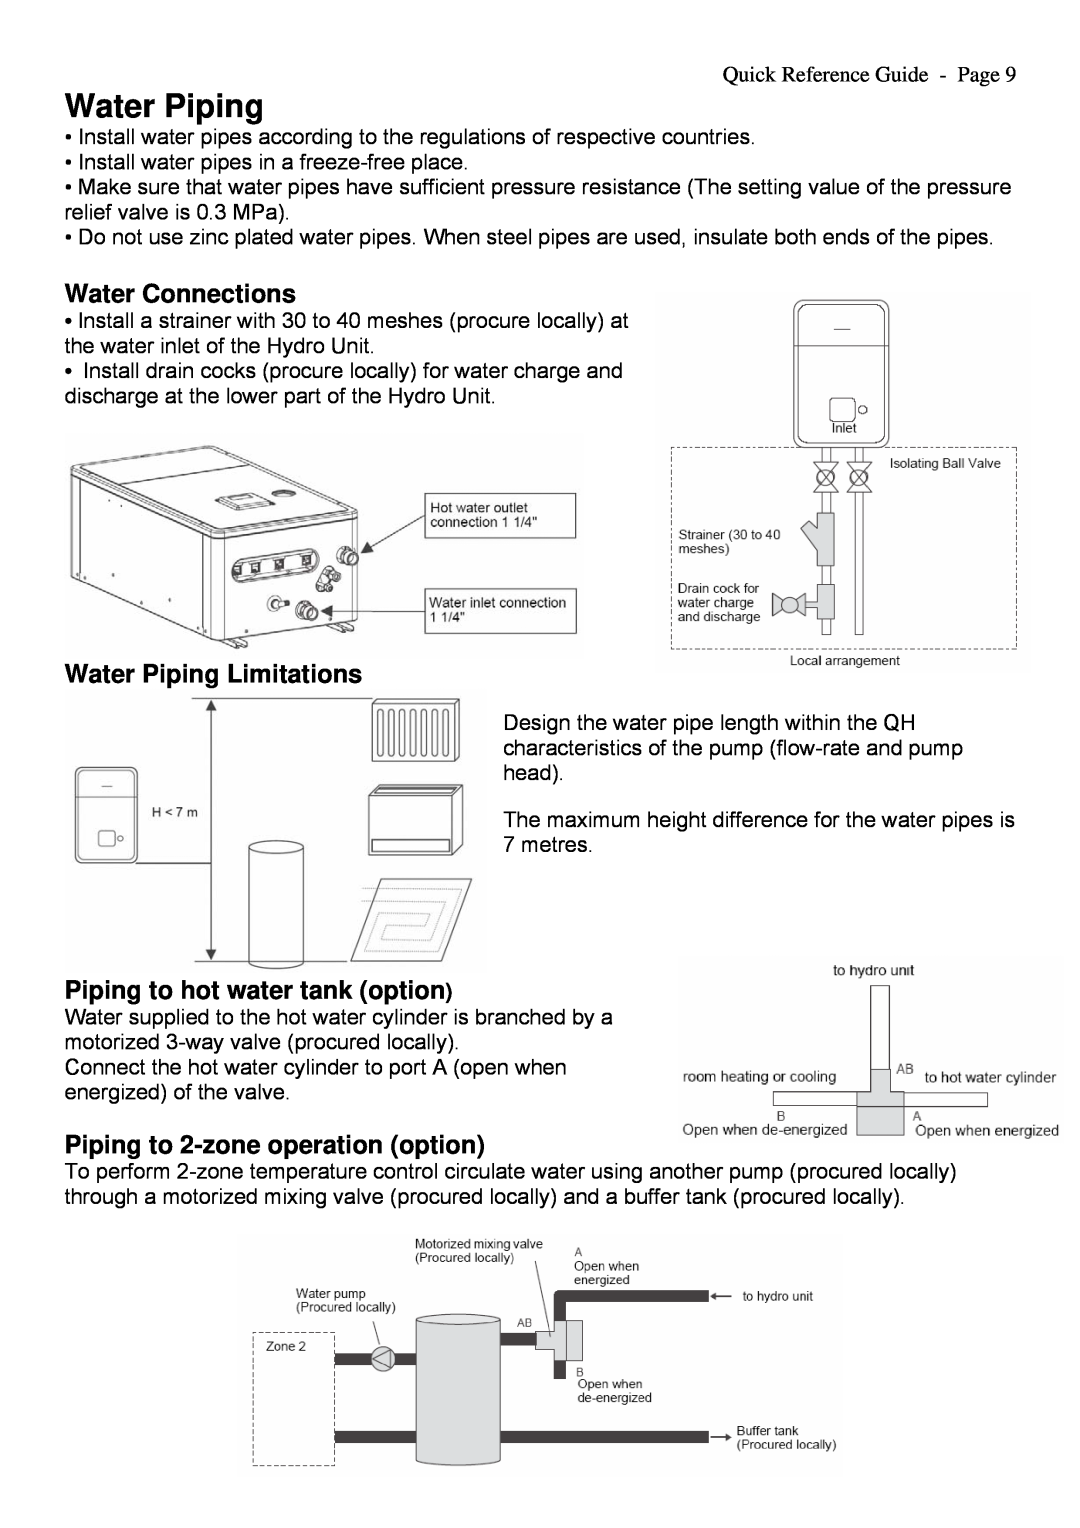 Toshiba A09-01P manual Water Connections, Water Piping Limitations, Piping to hot water tank option 